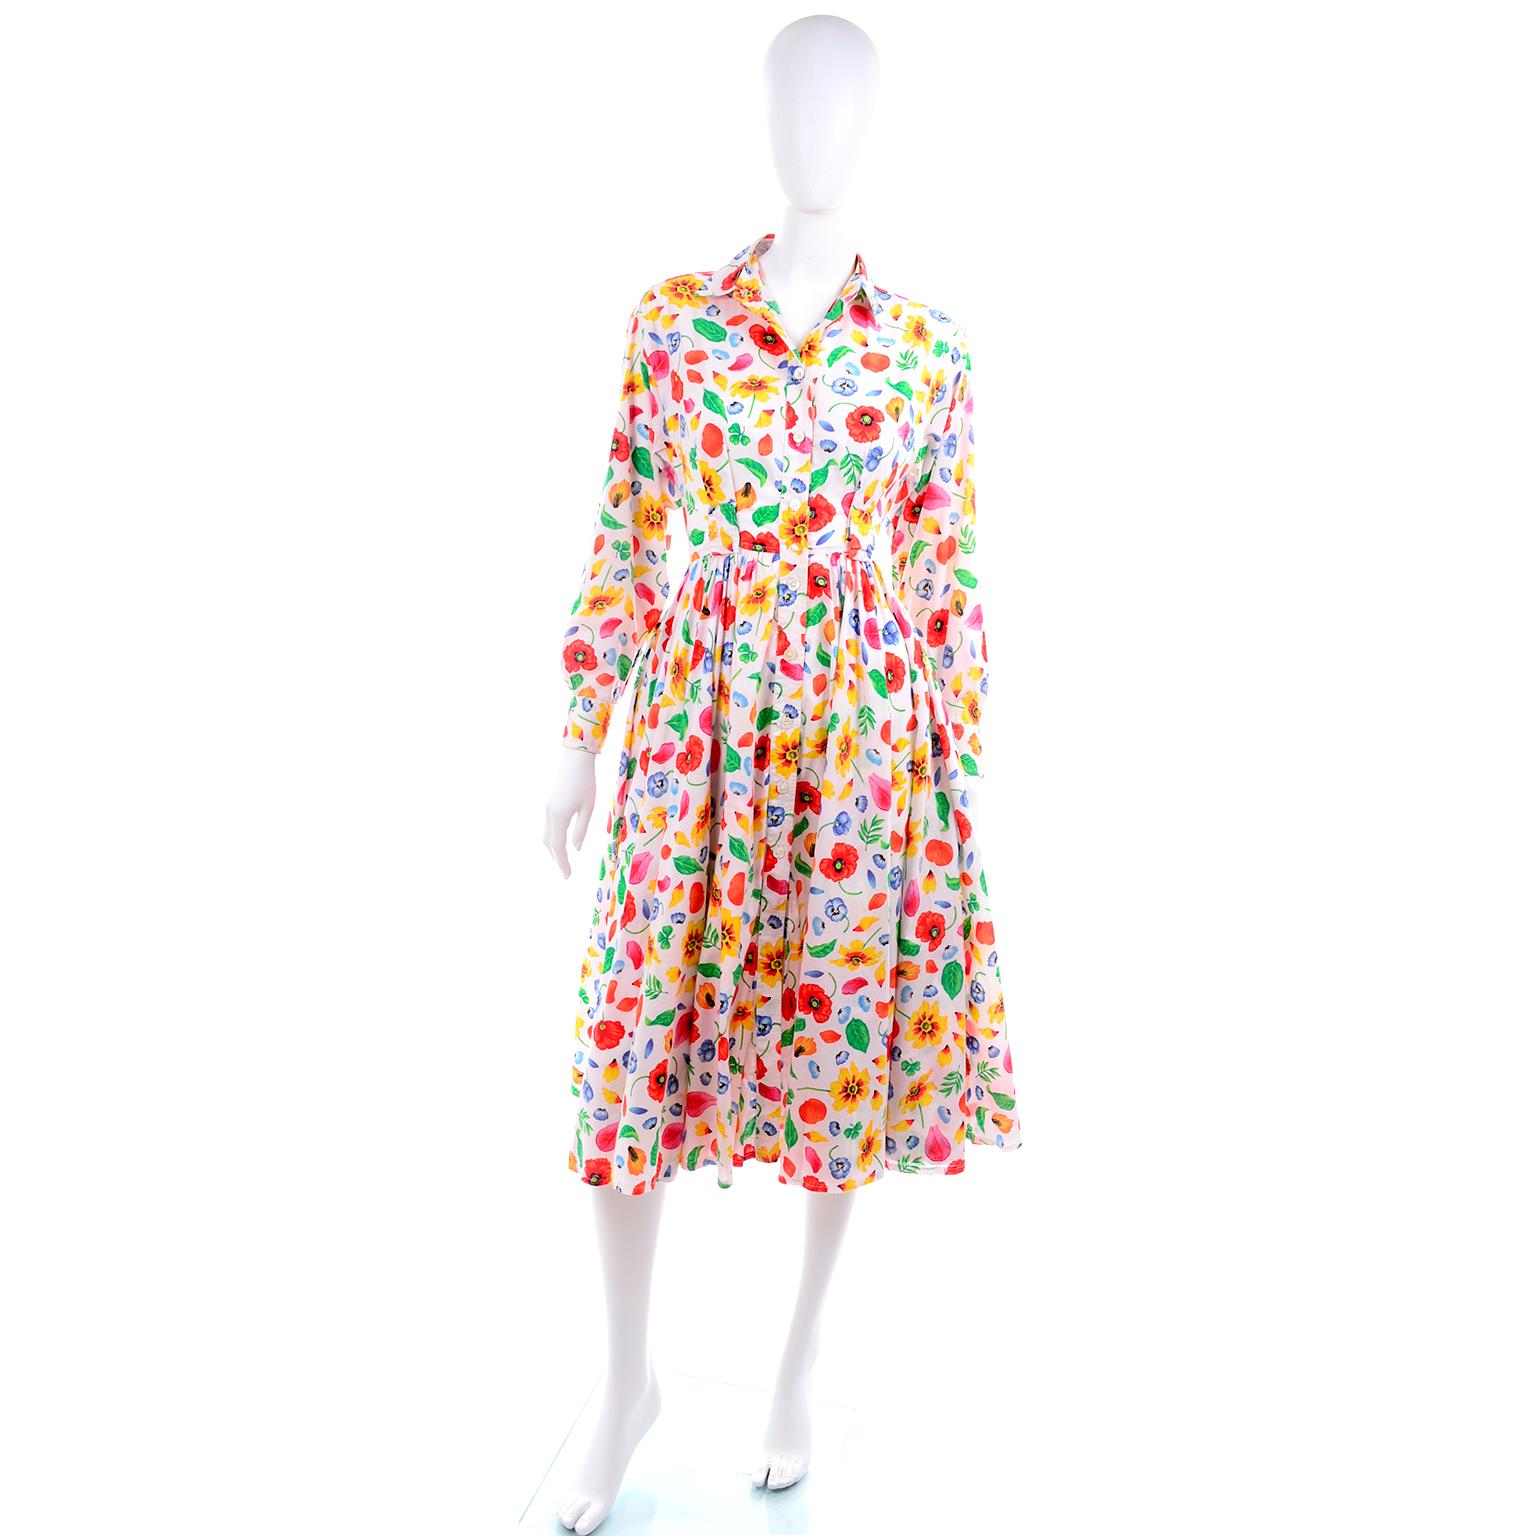 This is a pretty vintage 1990's Kenzo long sleeved cotton dress in a white, yellow, green, blue and red floral cotton print. This dress is beautifully made with a fitted waist, gathered full skirt, side slit pockets, and long sleeves. The shirtwaist